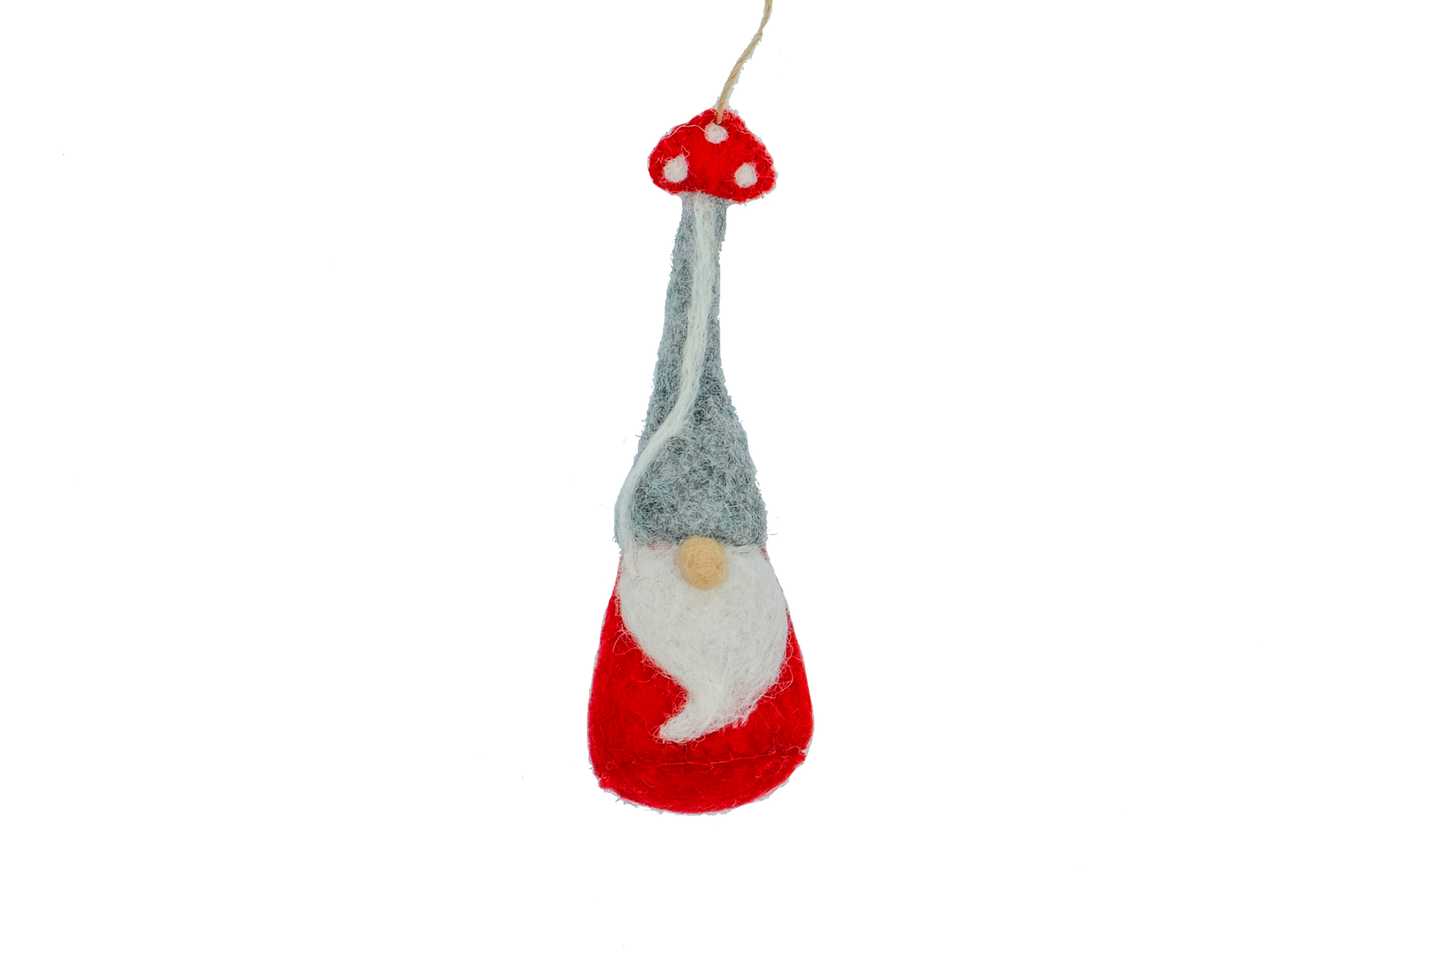 This Global Groove Life, handmade, ethical, fair trade, eco-friendly, sustainable, felt, red gnome ornament with mushroom motif, was created by artisans in Kathmandu Nepal and will be a beautiful addition to your Christmas tree this holiday season.